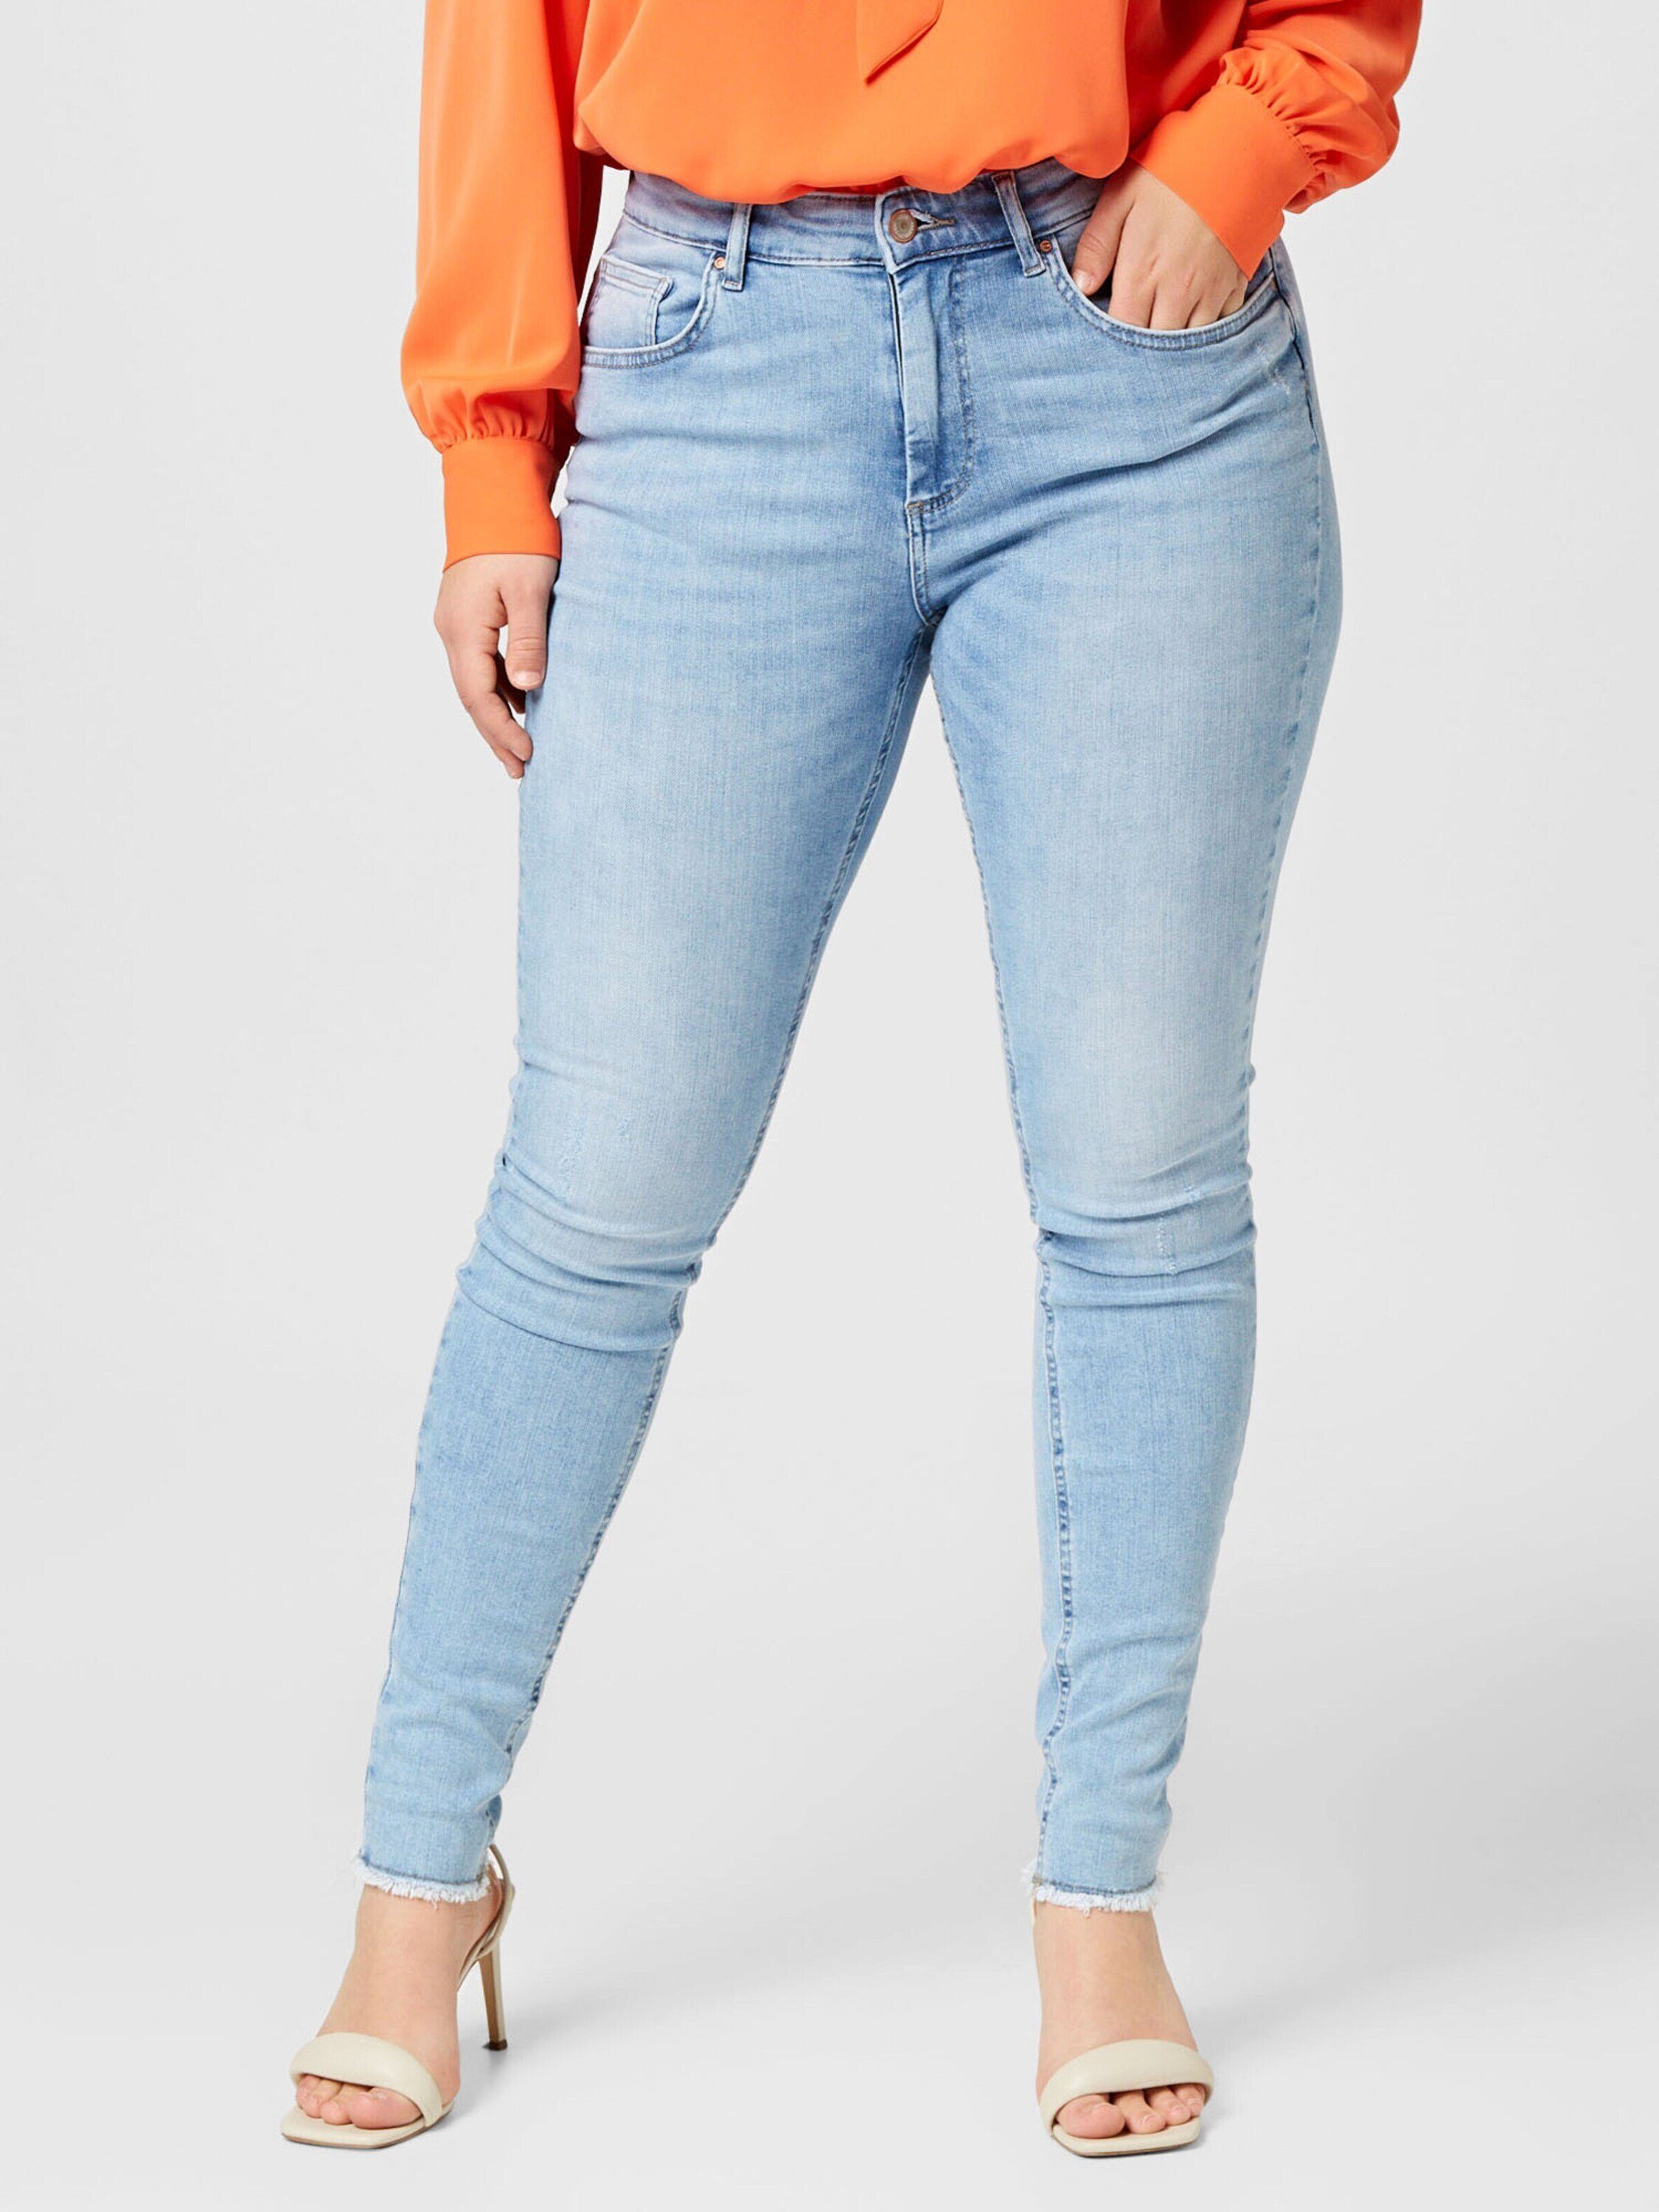 (1-tlg) Details, Plain/ohne CARMAKOMA Willy ONLY Skinny-fit-Jeans Knopfverschluss